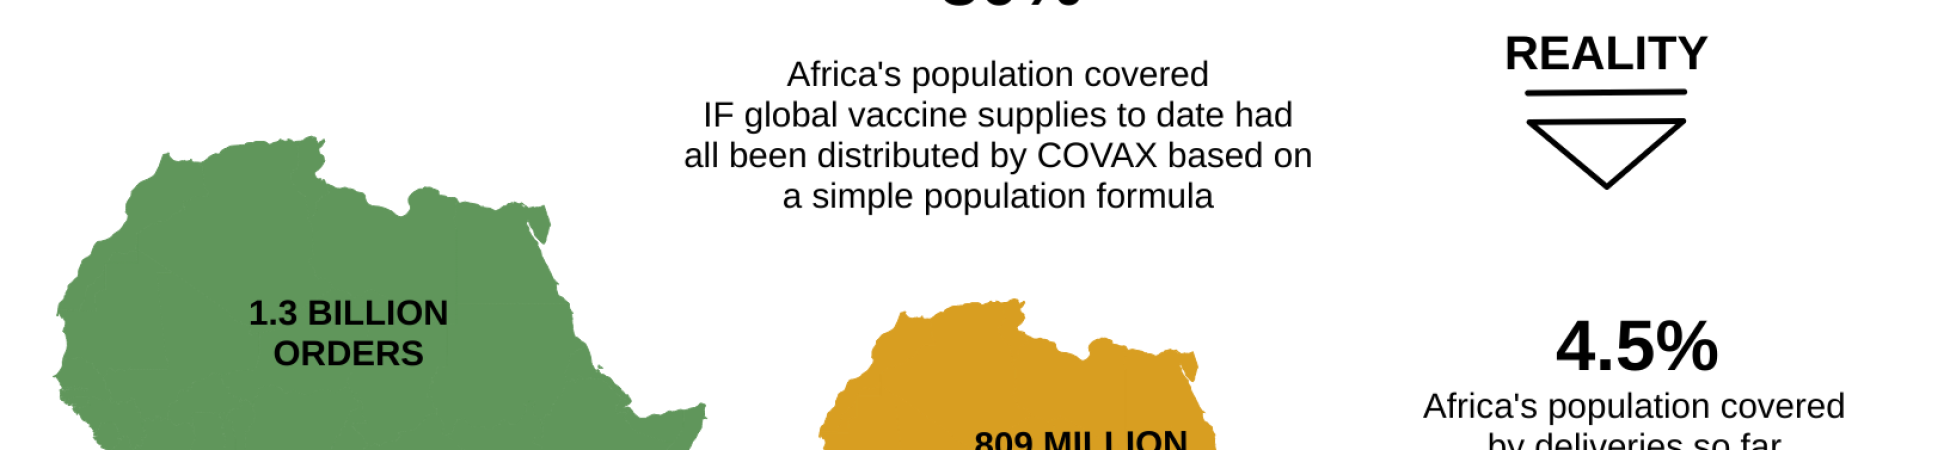 aug-covid19-graphic-africa-copy-12